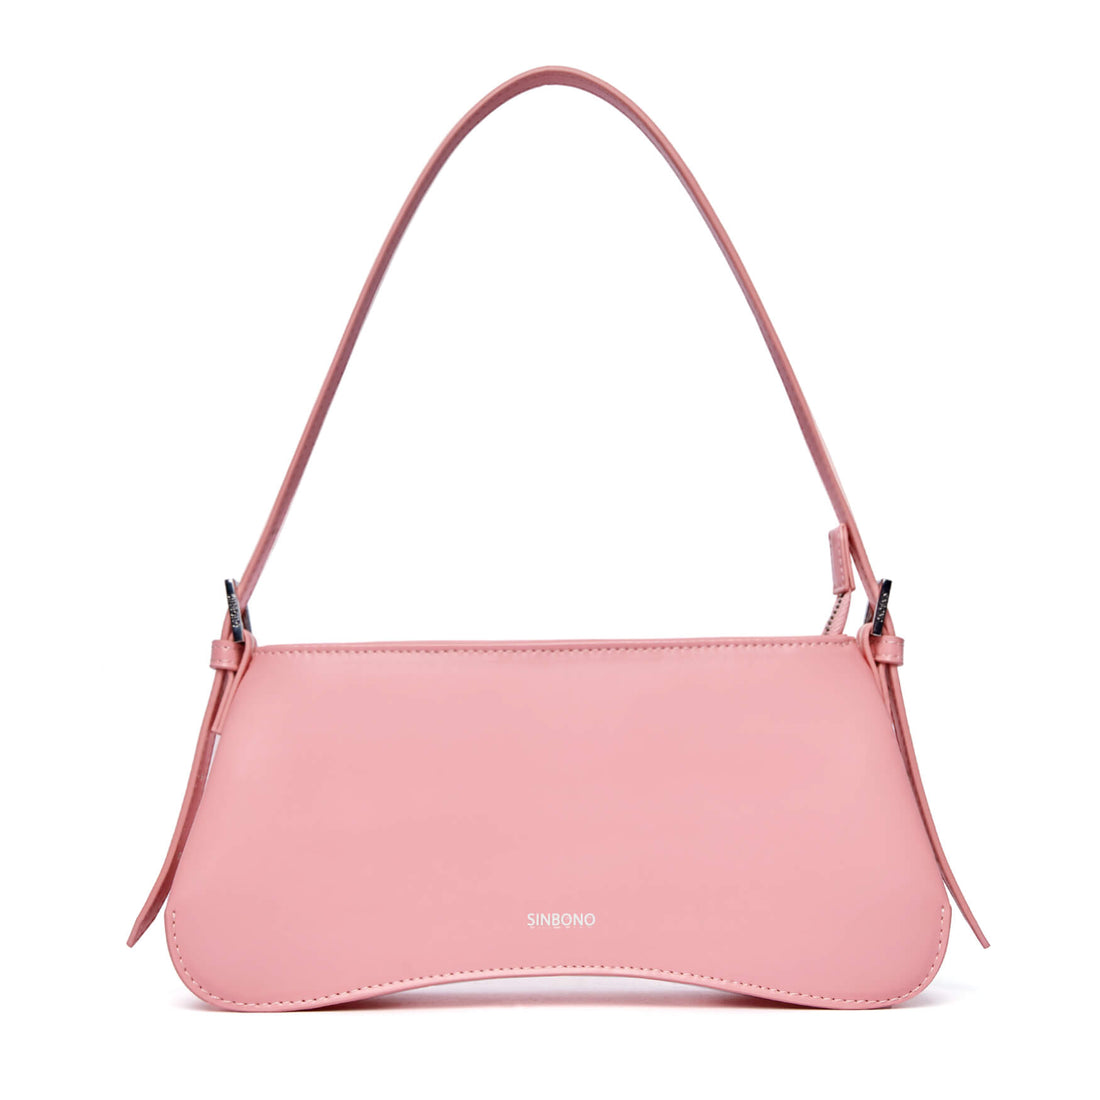 SINBONO Eva  Leather Baguette Bag Pink - Sustainable Leather Bag for women